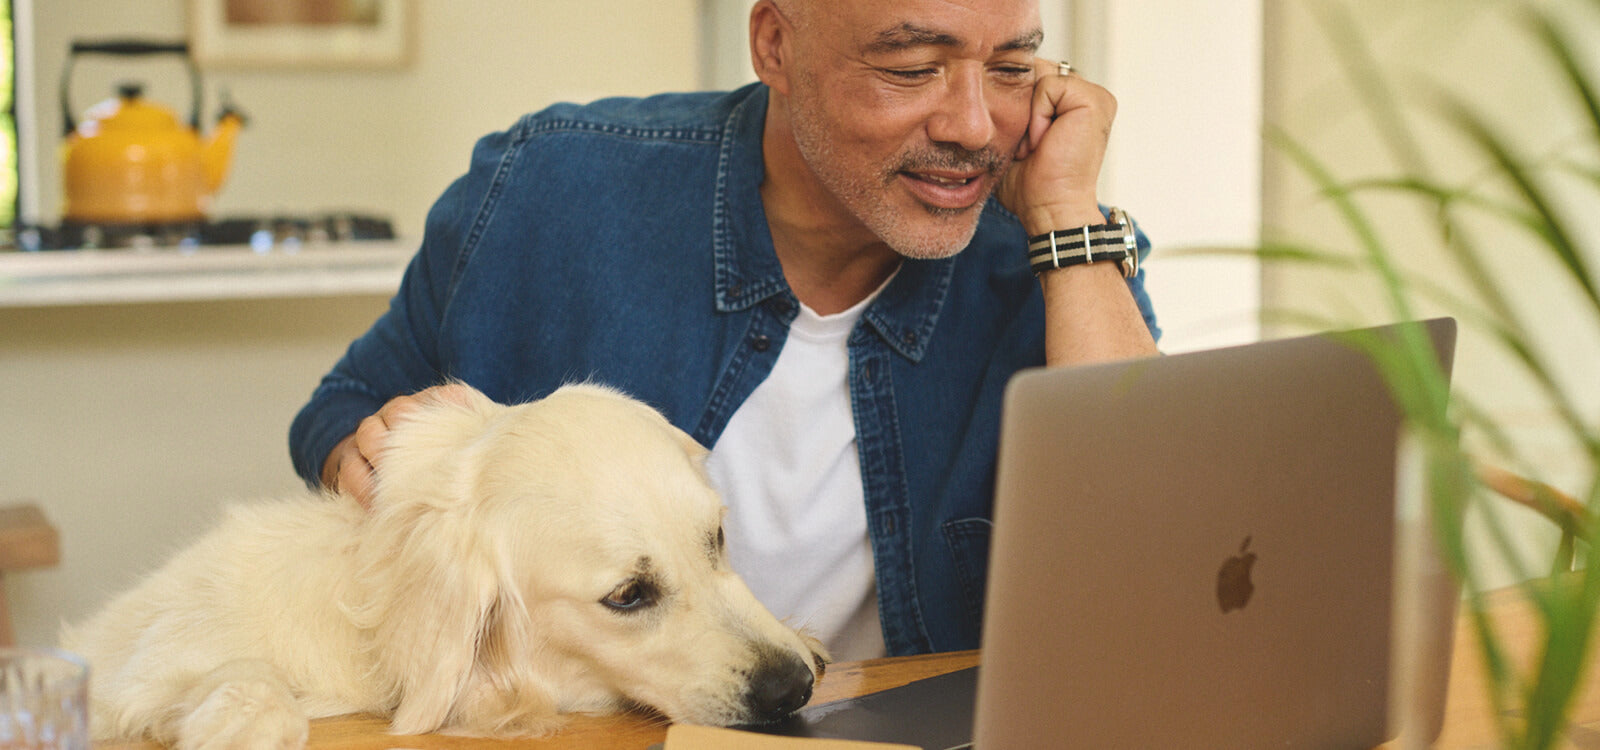 A man looks at his laptop next to his dog